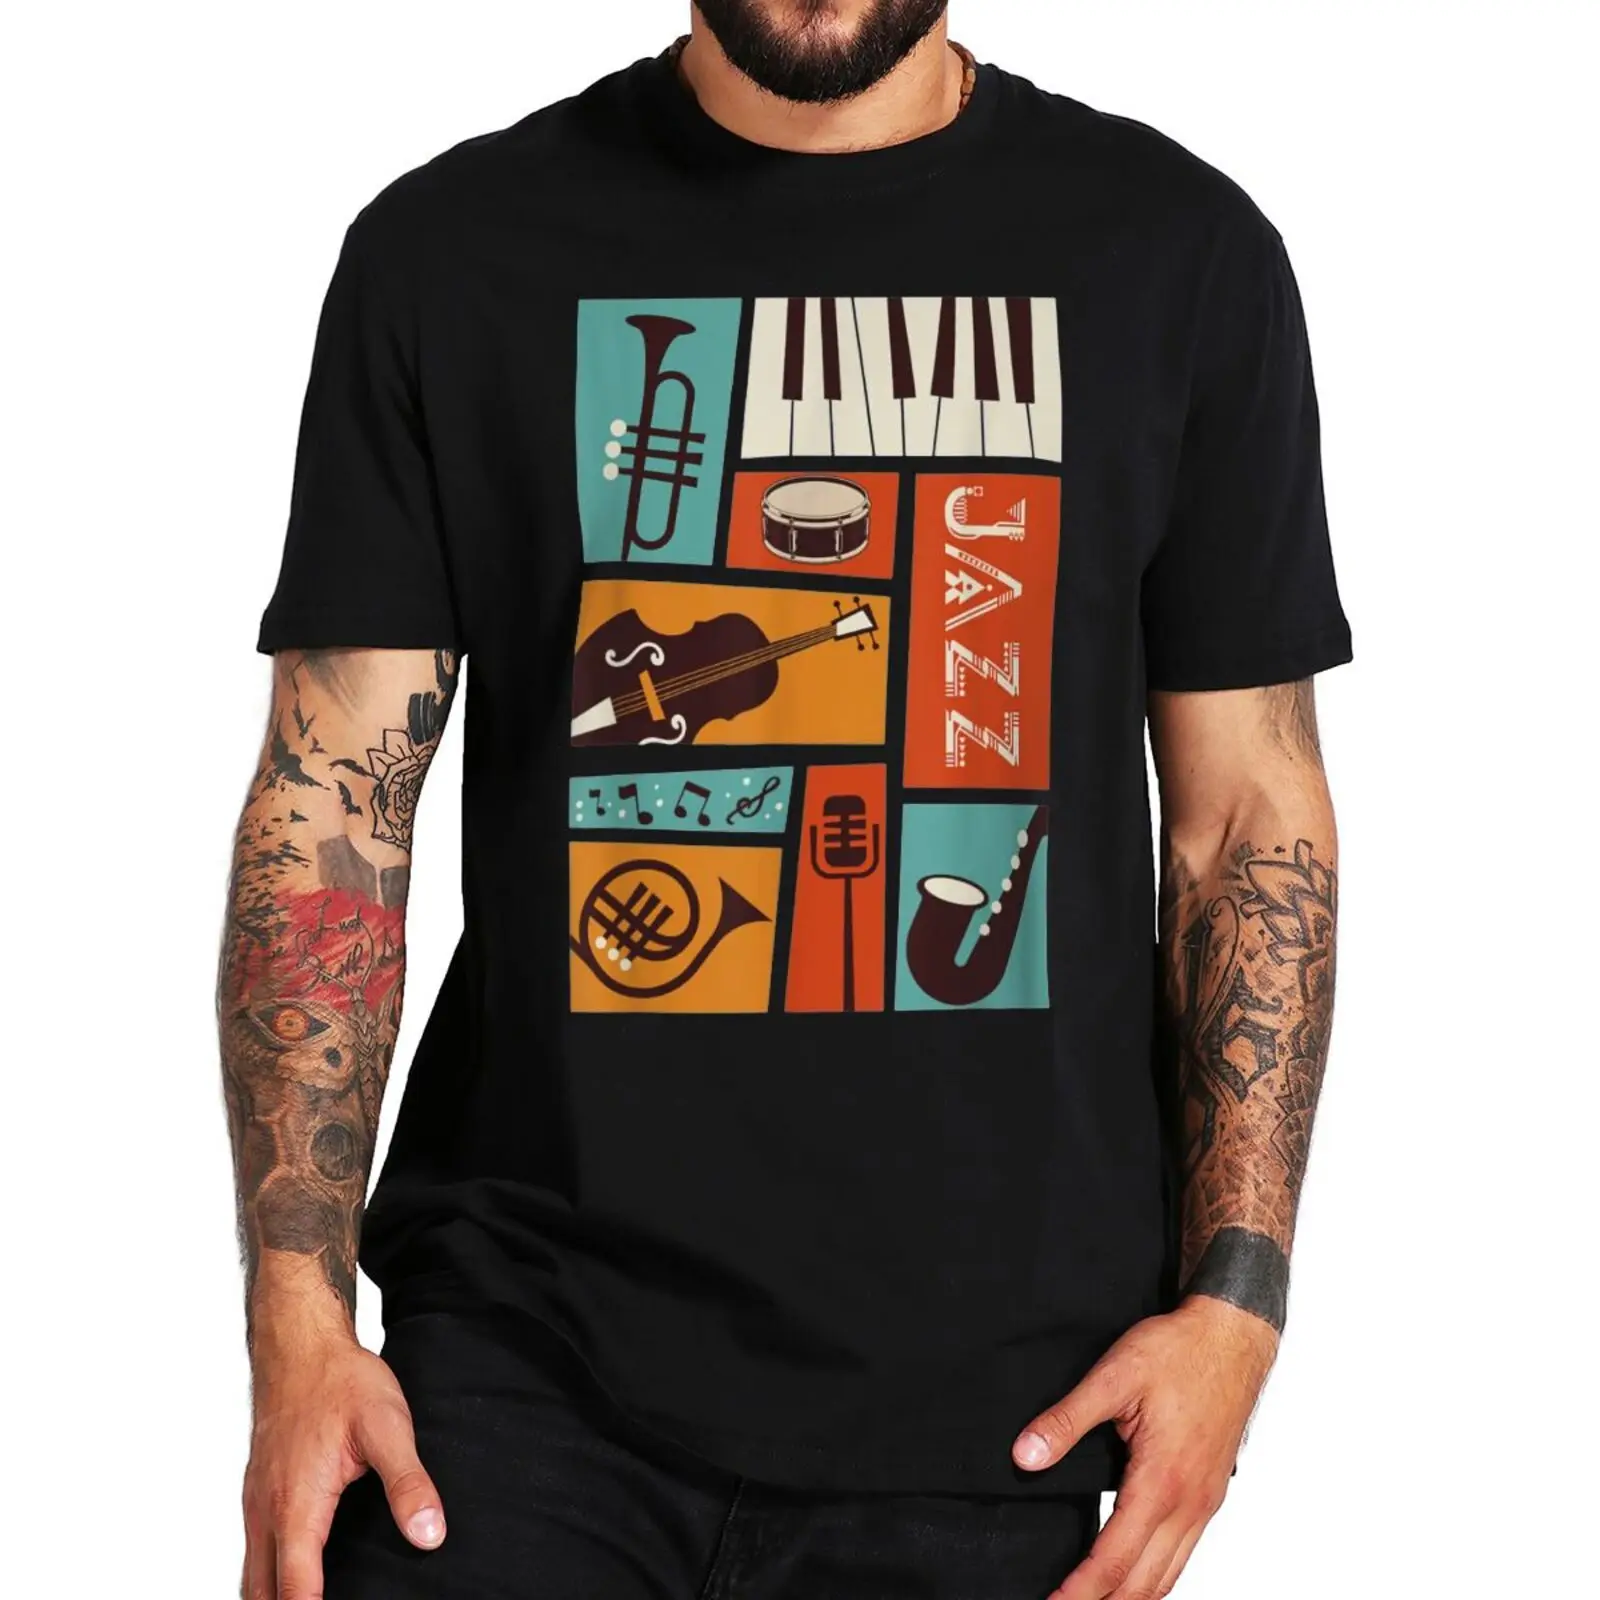 

Jazz Snare Piano Music Band T Shirt Musician Saxophone Trumpet Musical Instrument Funny T-Shirt For Men Women 100% Cotton